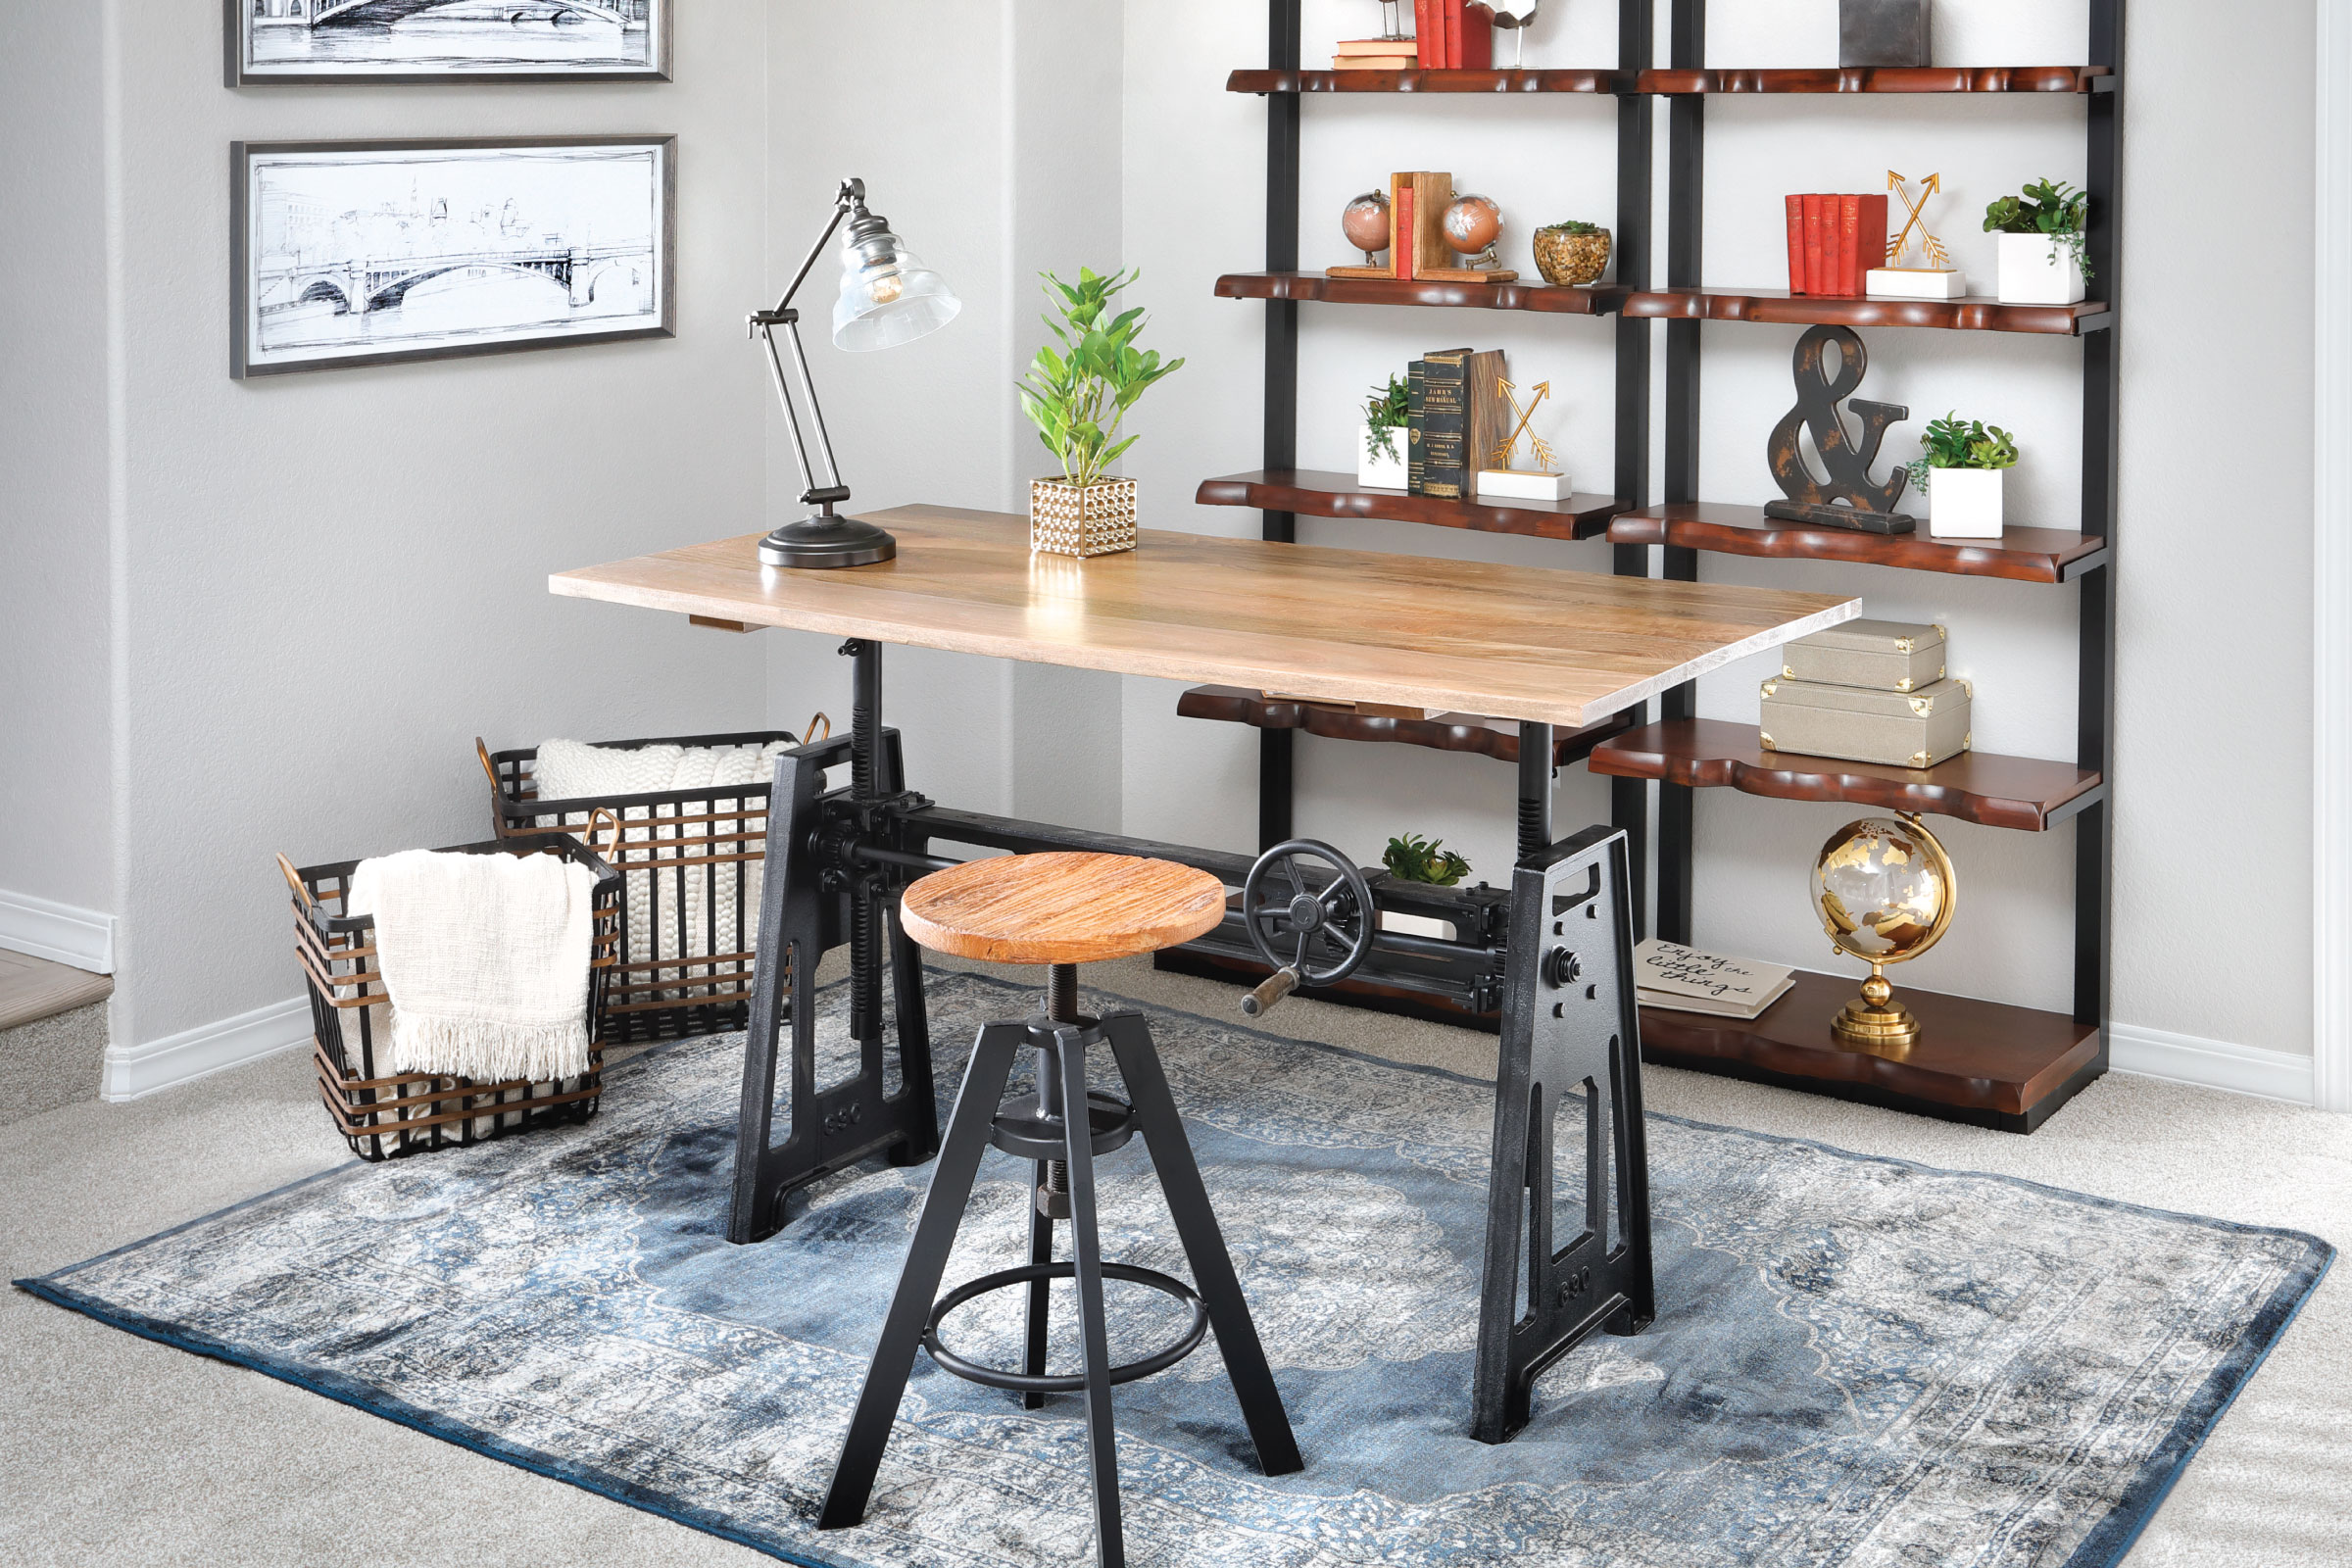 Crank Top table functioning as a desk with a metal bottomed stool that has a round wooden top. 